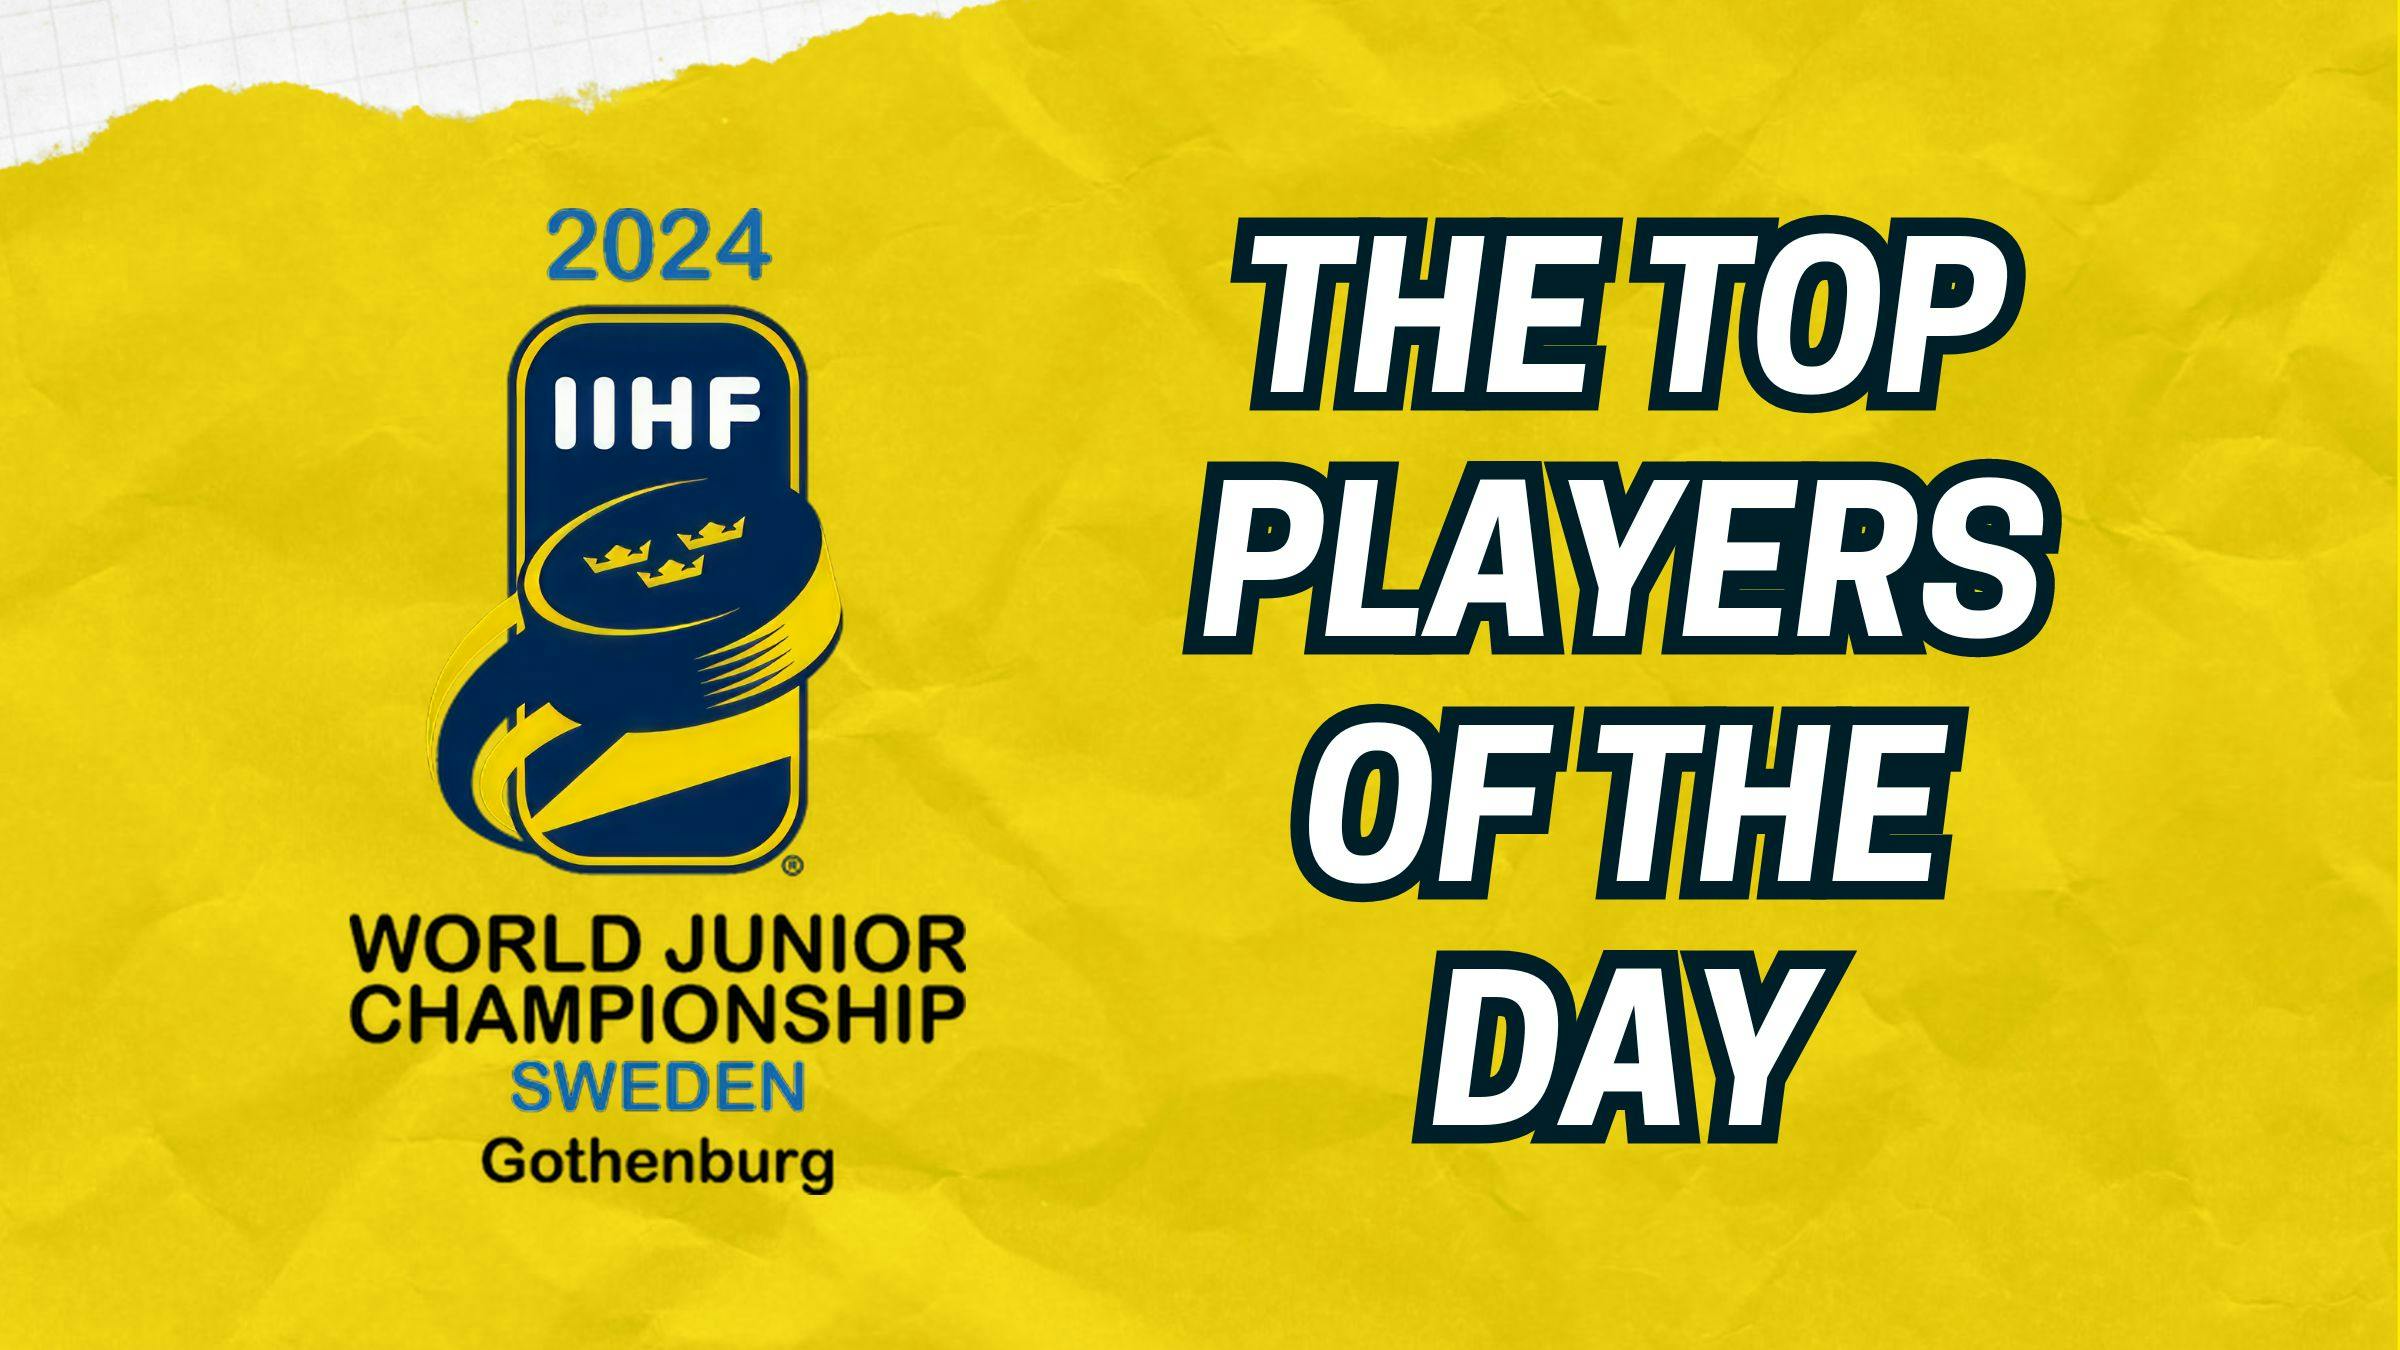 Top players from Day 1 of the 2024 World Junior Championship